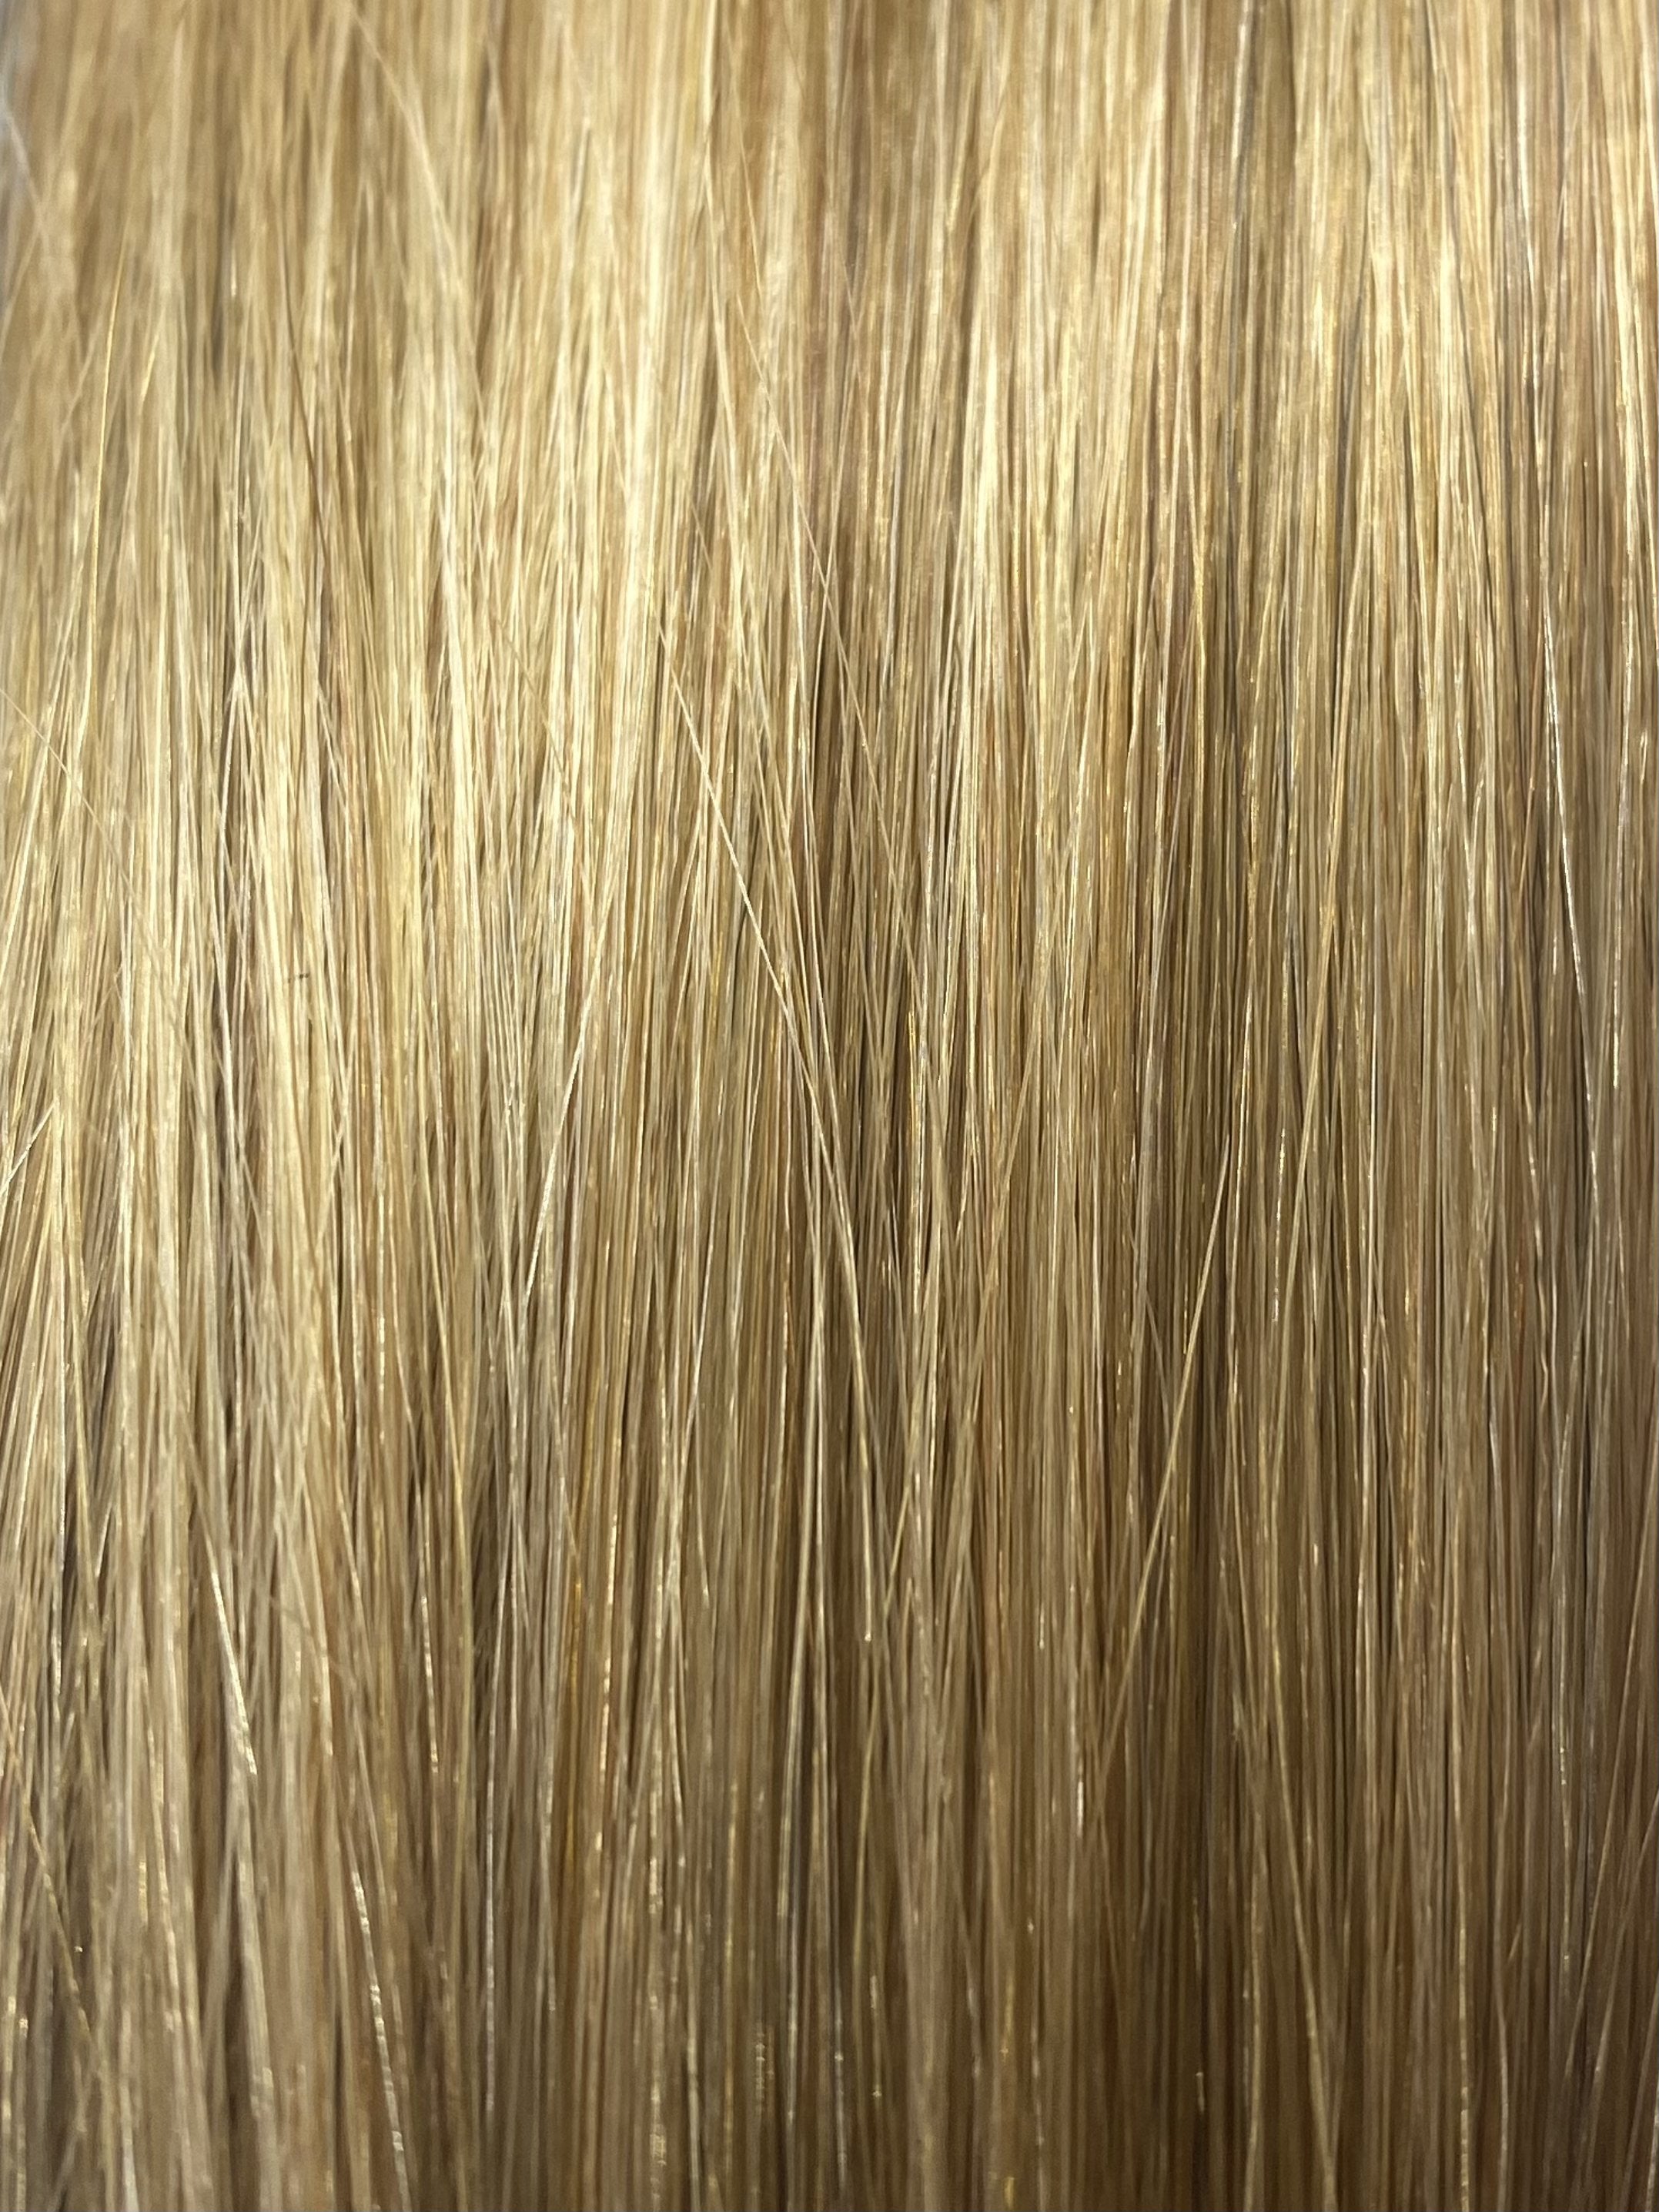 FUSION HIGHLIGHT #12/DB2 LIGHT/COPPER GOLDEN BLONDE 60CM/ 24 INCHES  -  25 GRAMS - Image 1